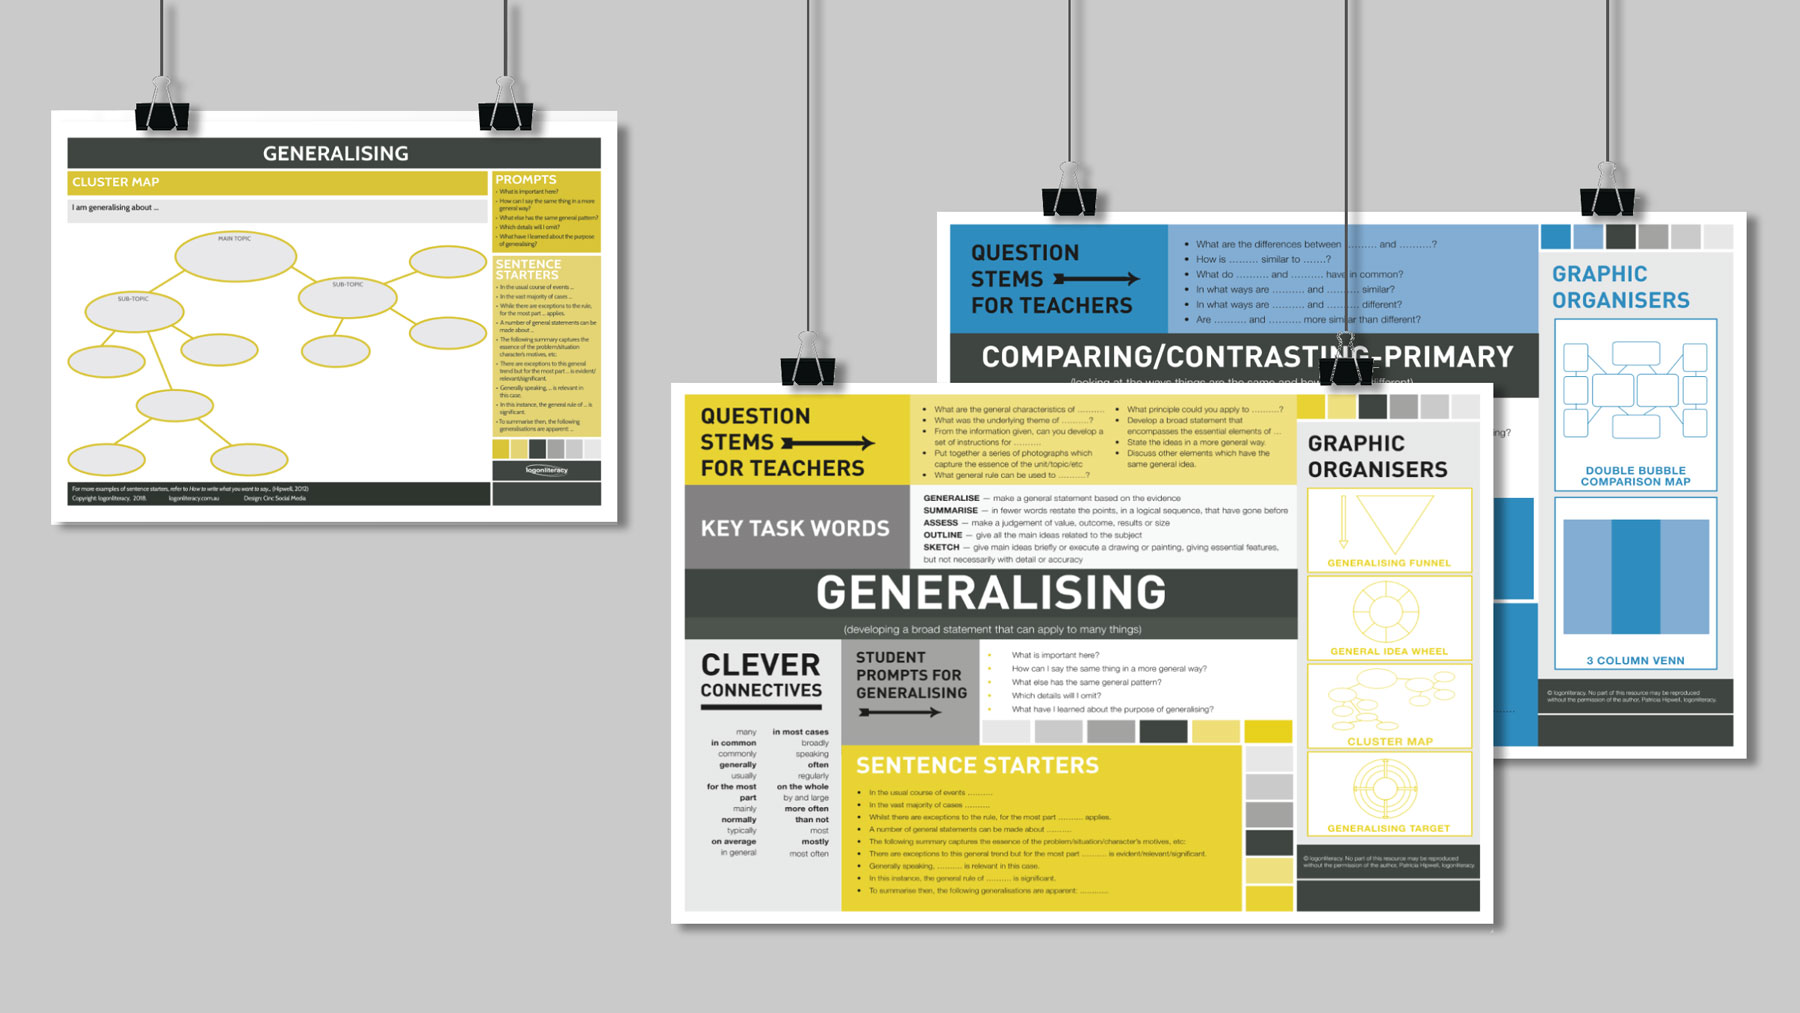 Posters & Graphic Organisers